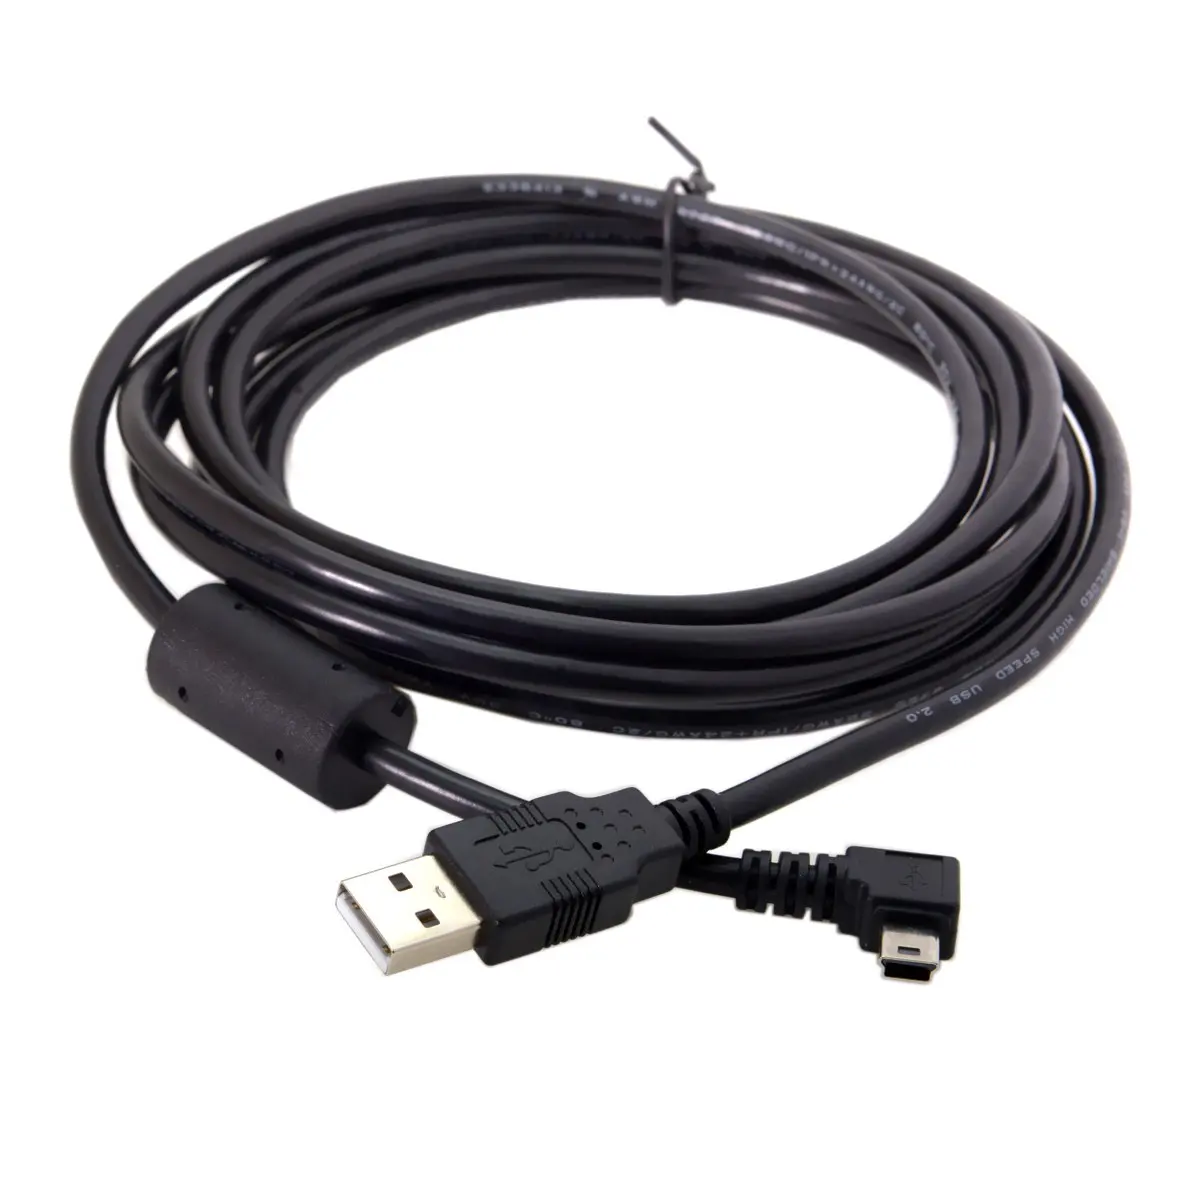 

Type B Mini USB 5pin Male to USB 2.0 Male Data Cable with Ferrite 5m 3m 1.8m 0.5m Right Angled Up angled Down anled 90 Degree